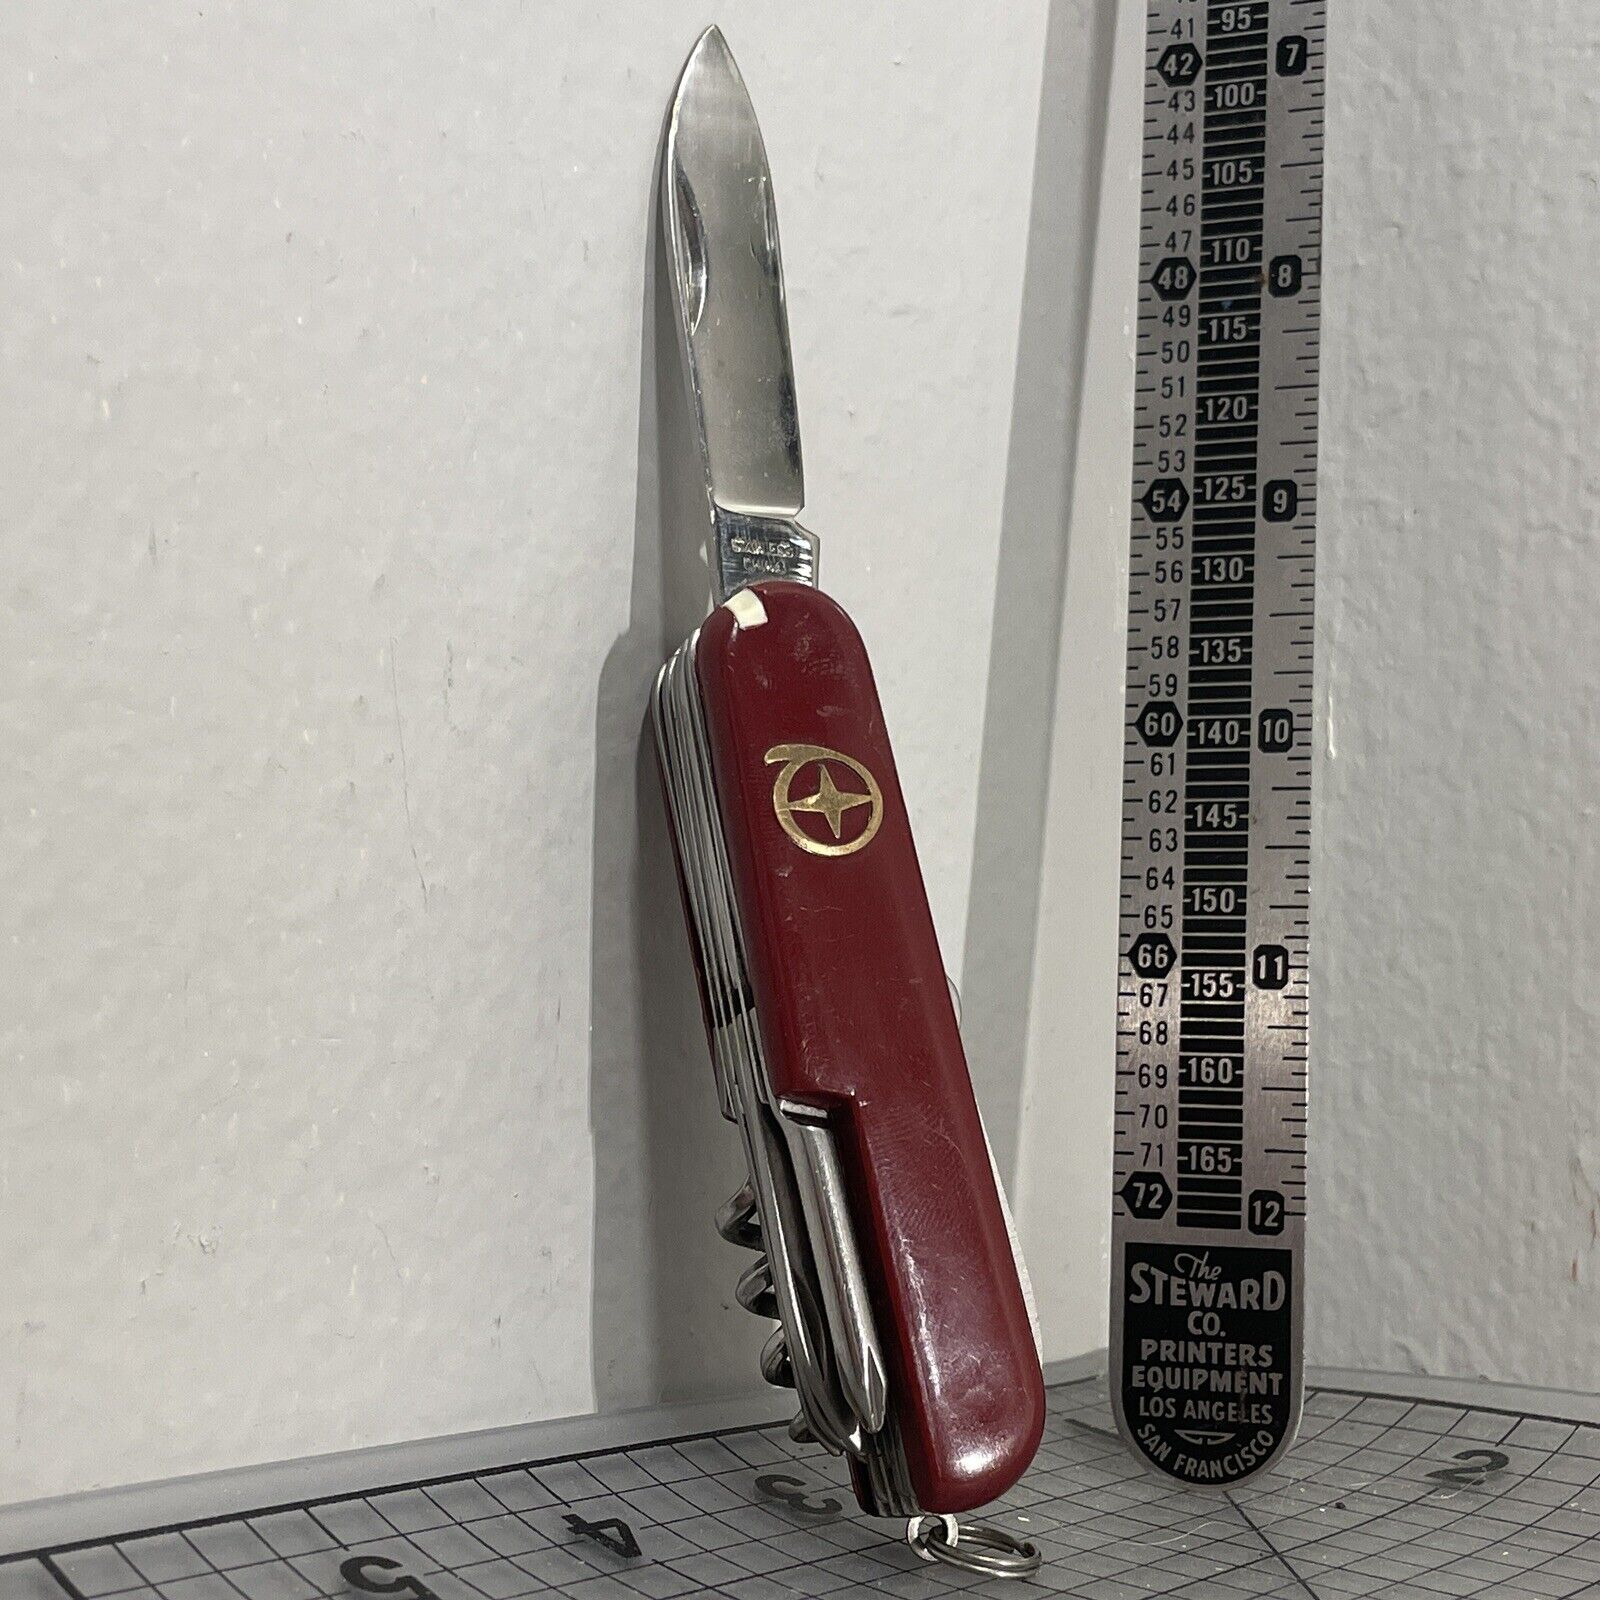 Victorinox 56381 3.5 inch Blade Pocket Knife - Red USED Paint Spray 12 Tools